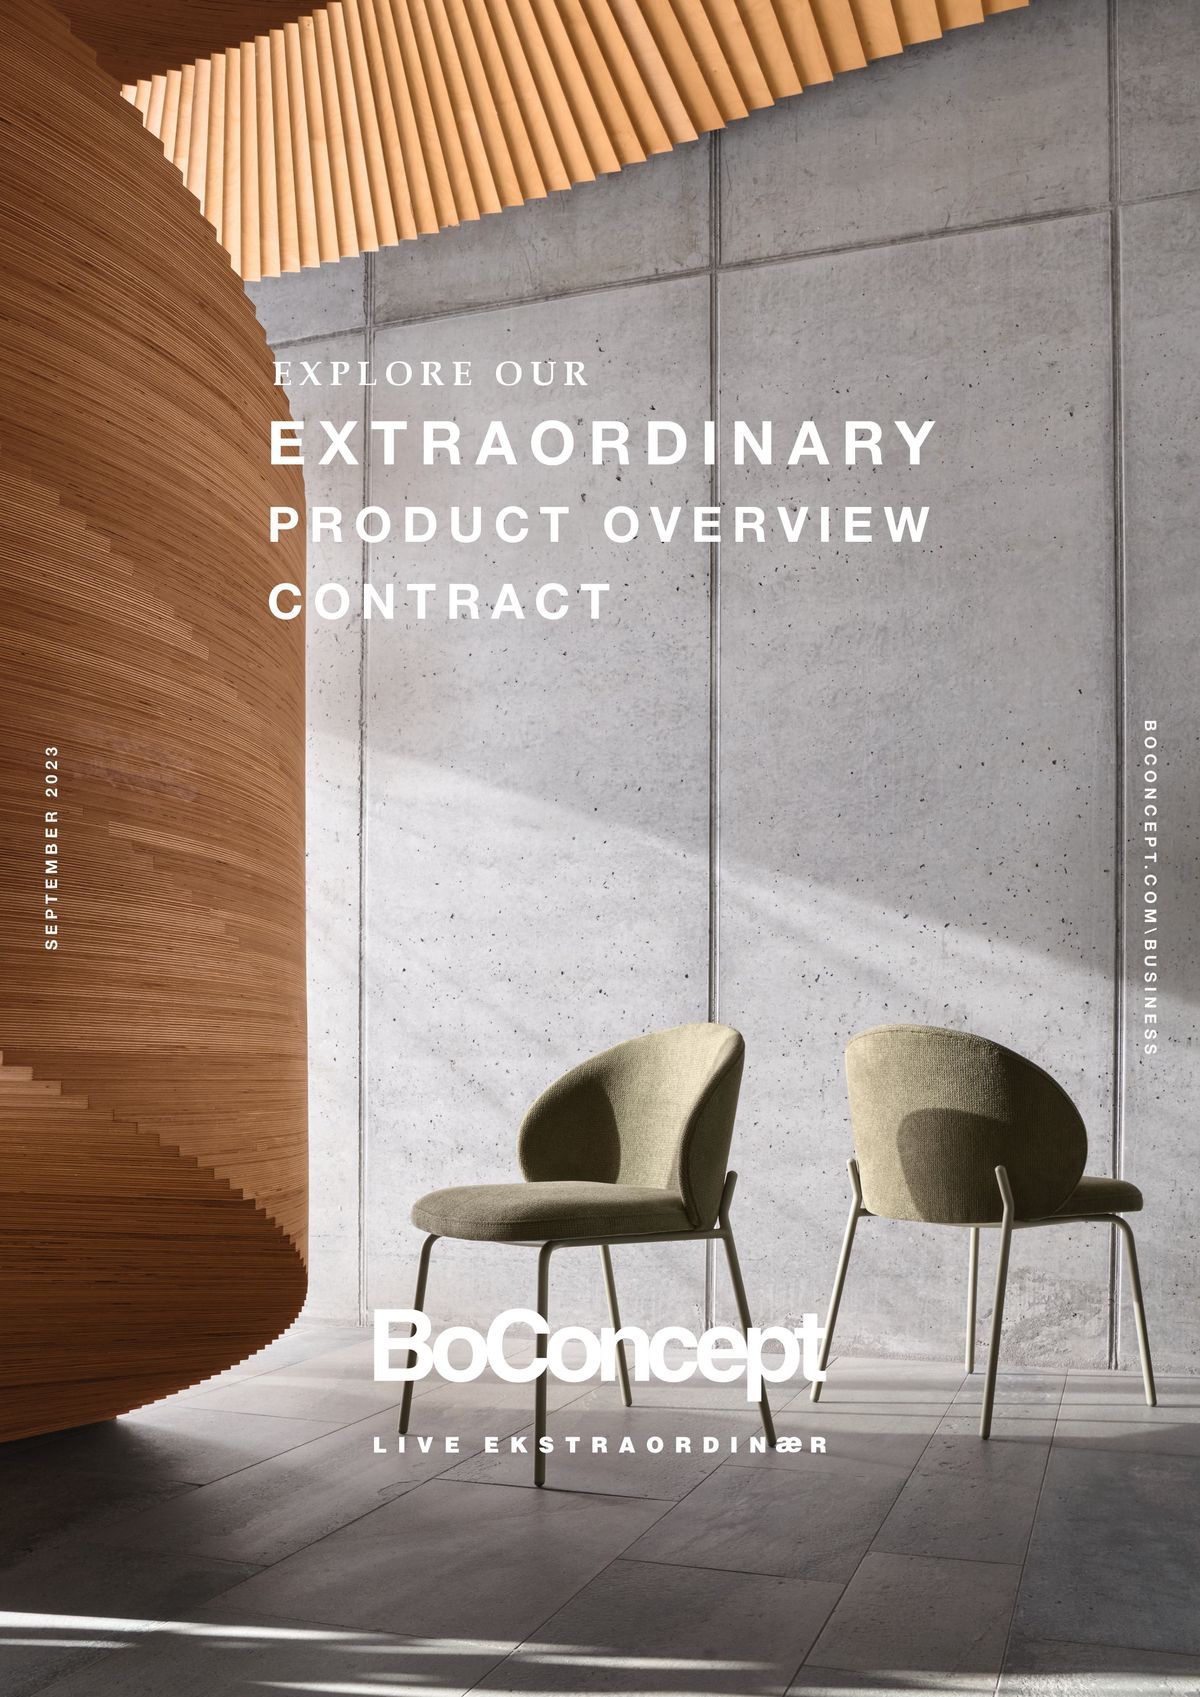 Catalogue Explore our extraordinary product overview contract, page 00001